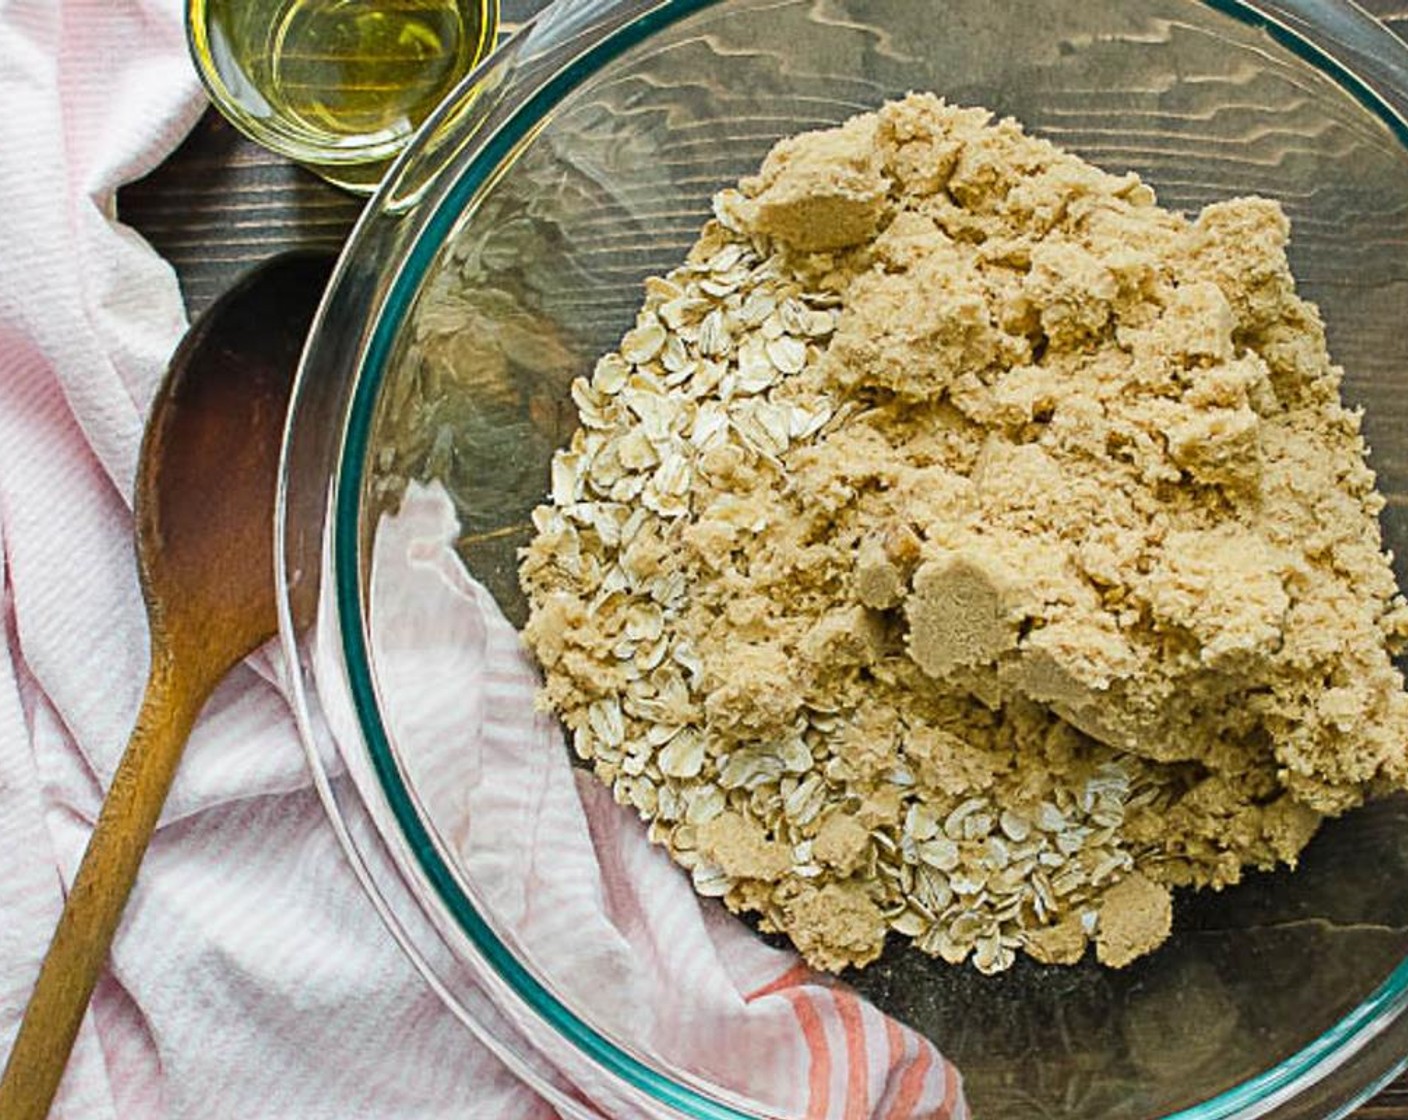 step 2 Mix Oatmeal (2 cups) and Brown Sugar (1 cup) in a medium bowl. Pour Vegetable Oil (1/2 cup) over oatmeal mixture and toss well to combine. Set aside for one hour.